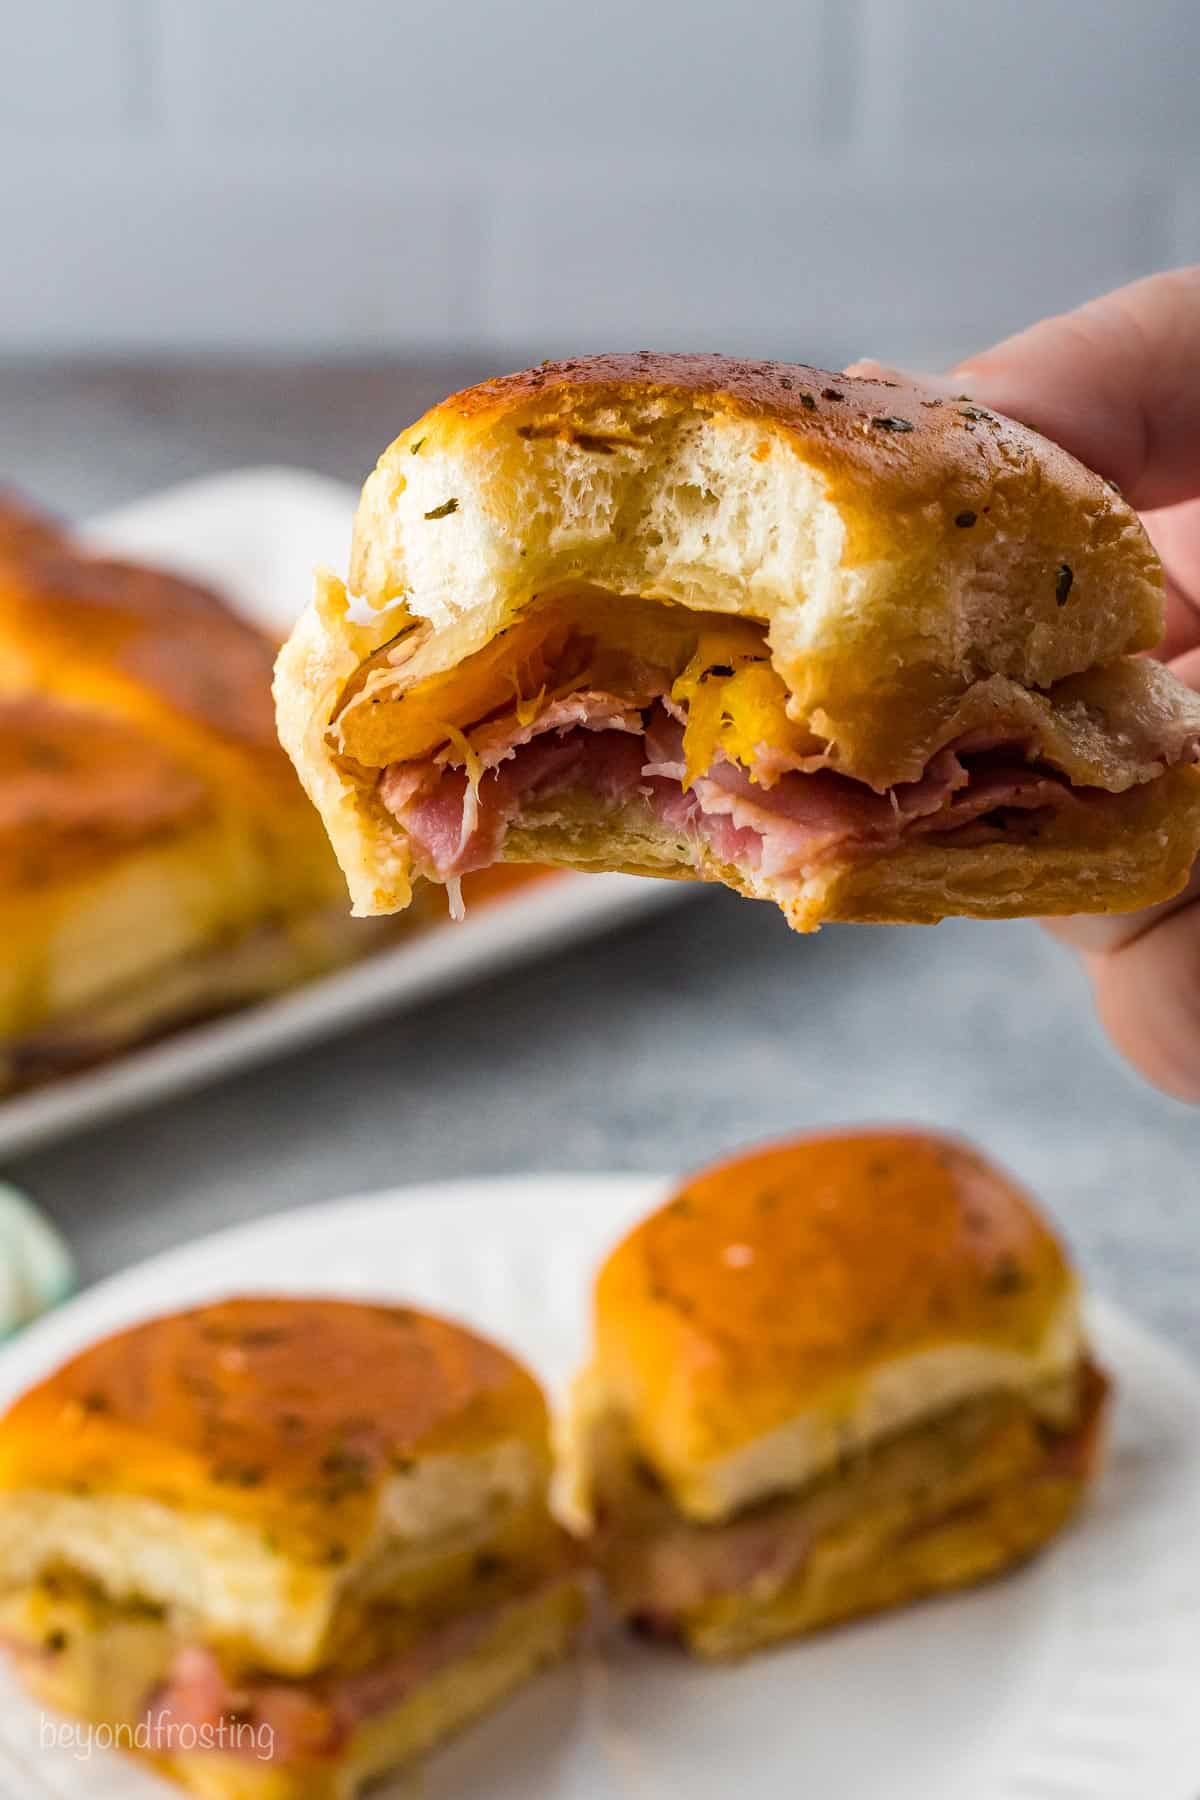 A Ham and Cheese Slider with a bite taken out, showing all of the cheese and ham on the inside.